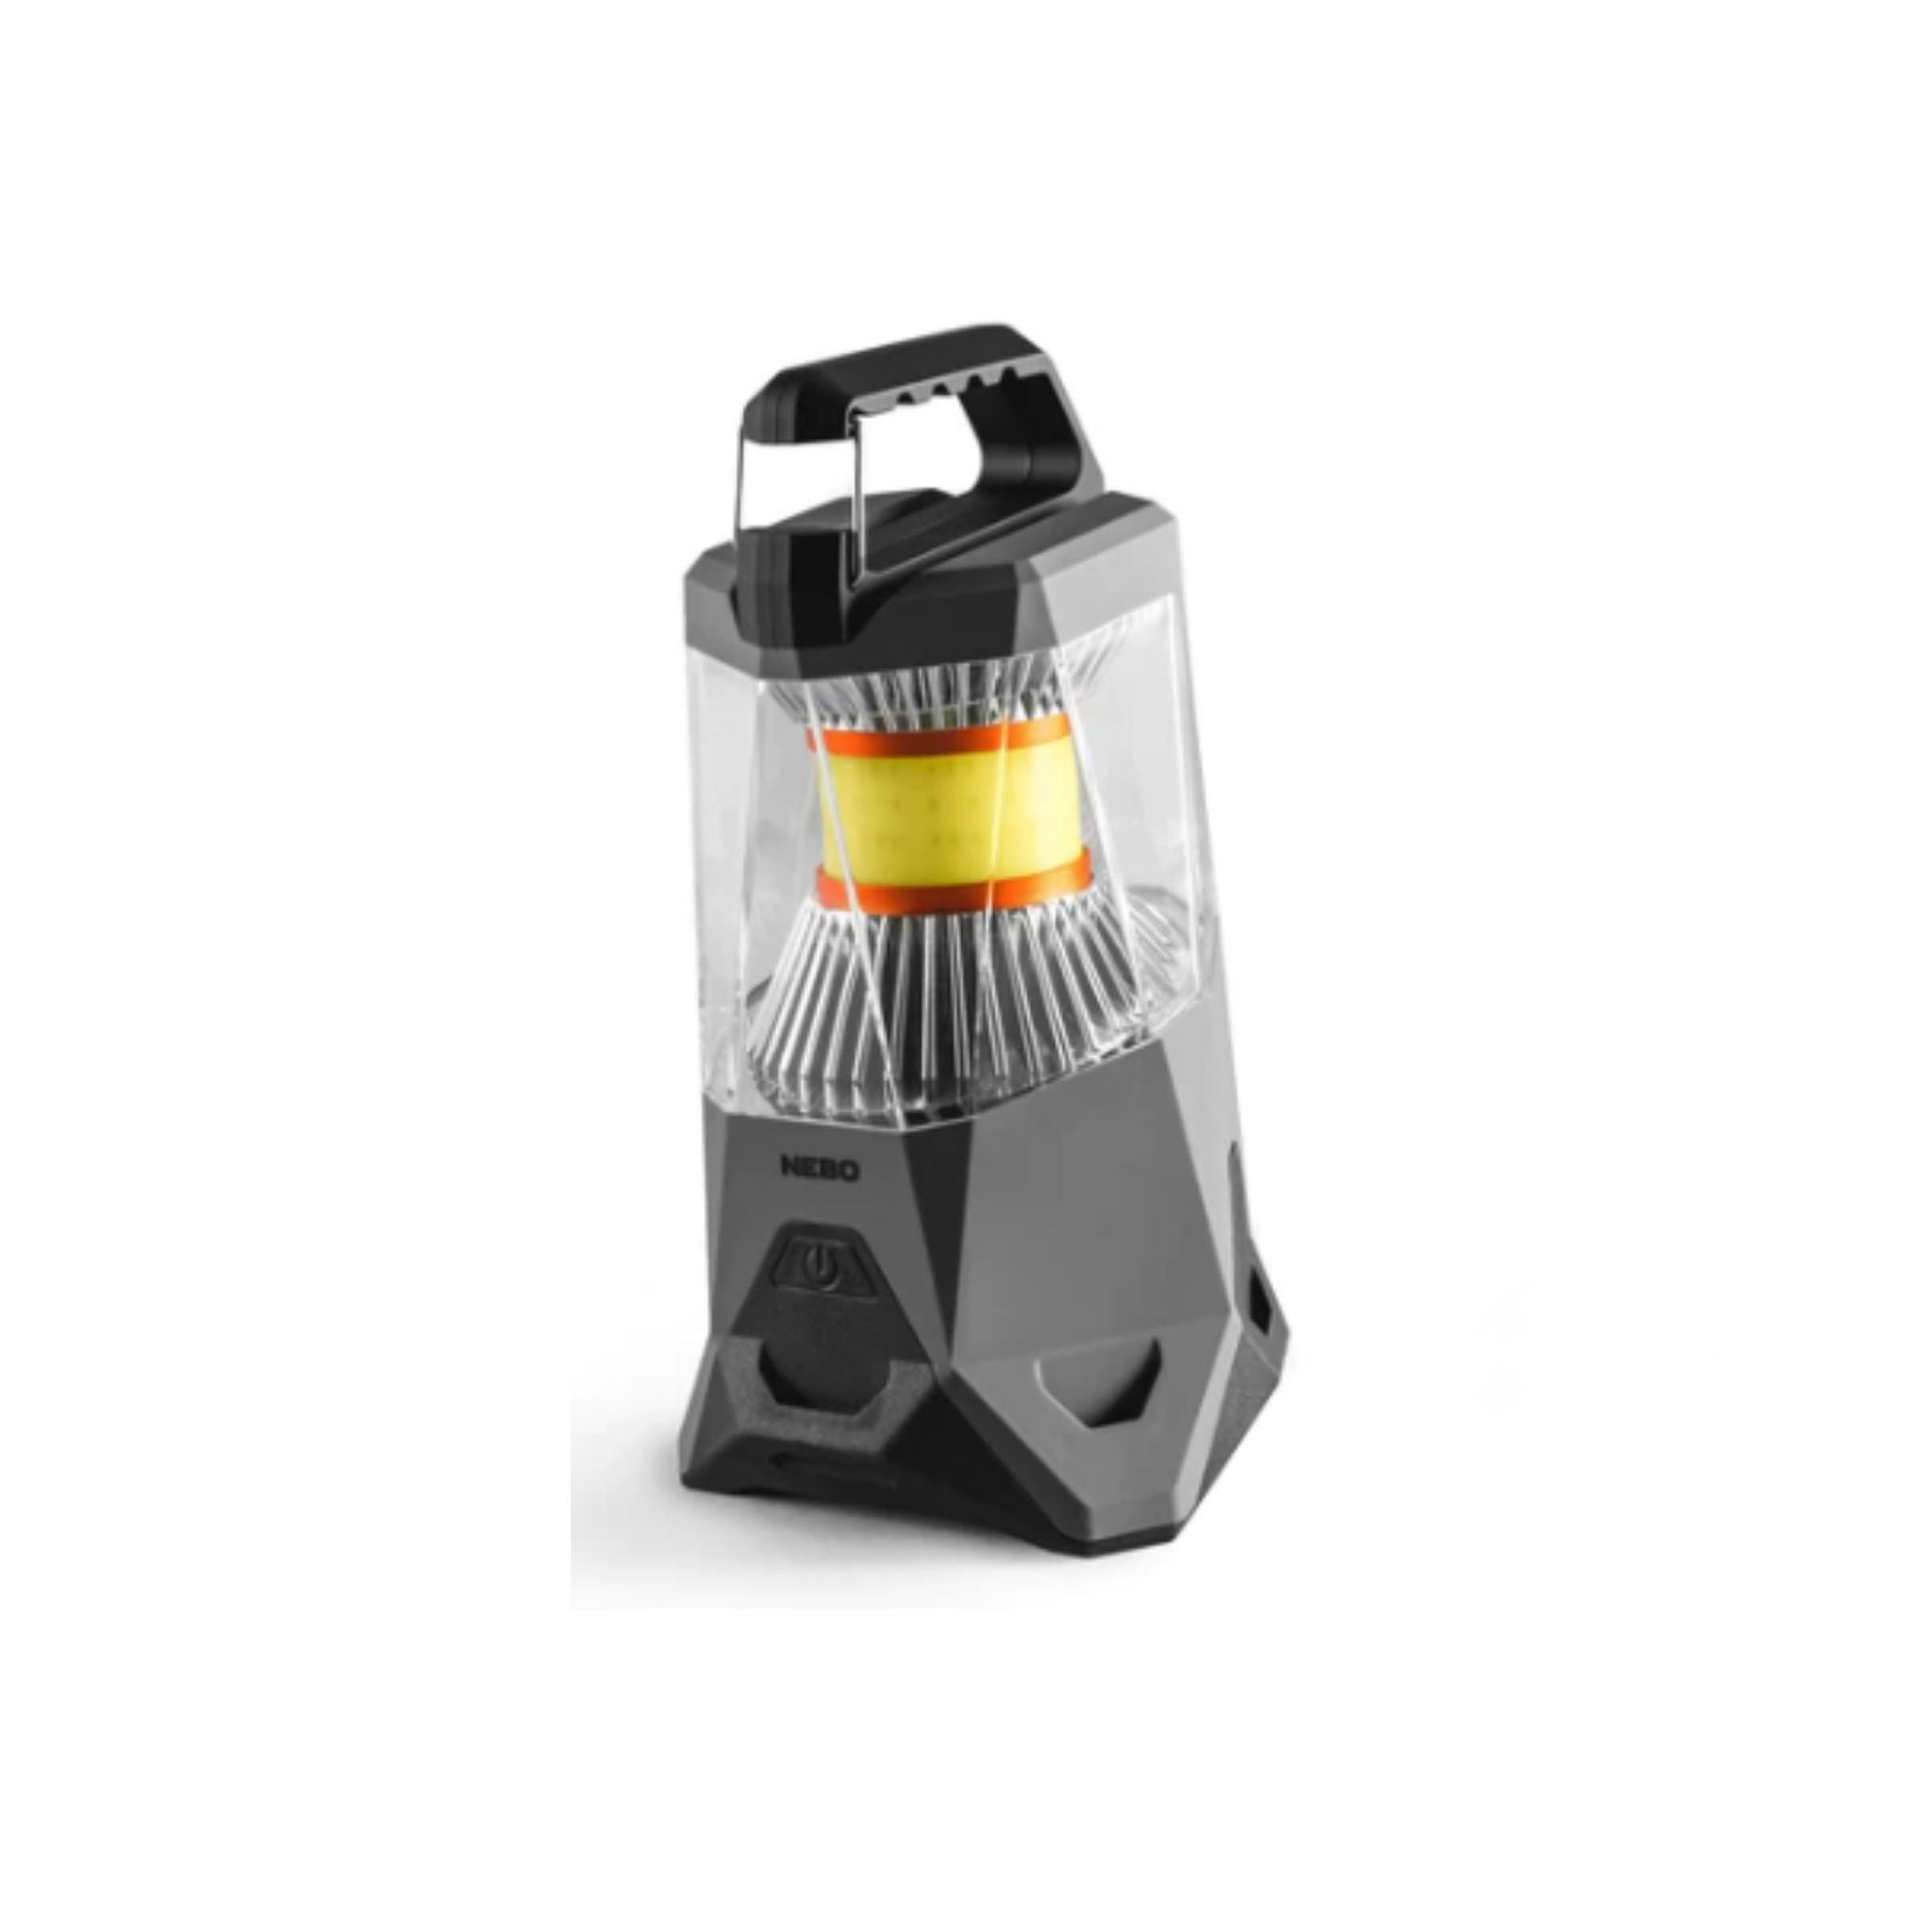 Nebo Galileo 500 Rechargeable Lantern | Nebo | Portwest - The Outdoor Shop